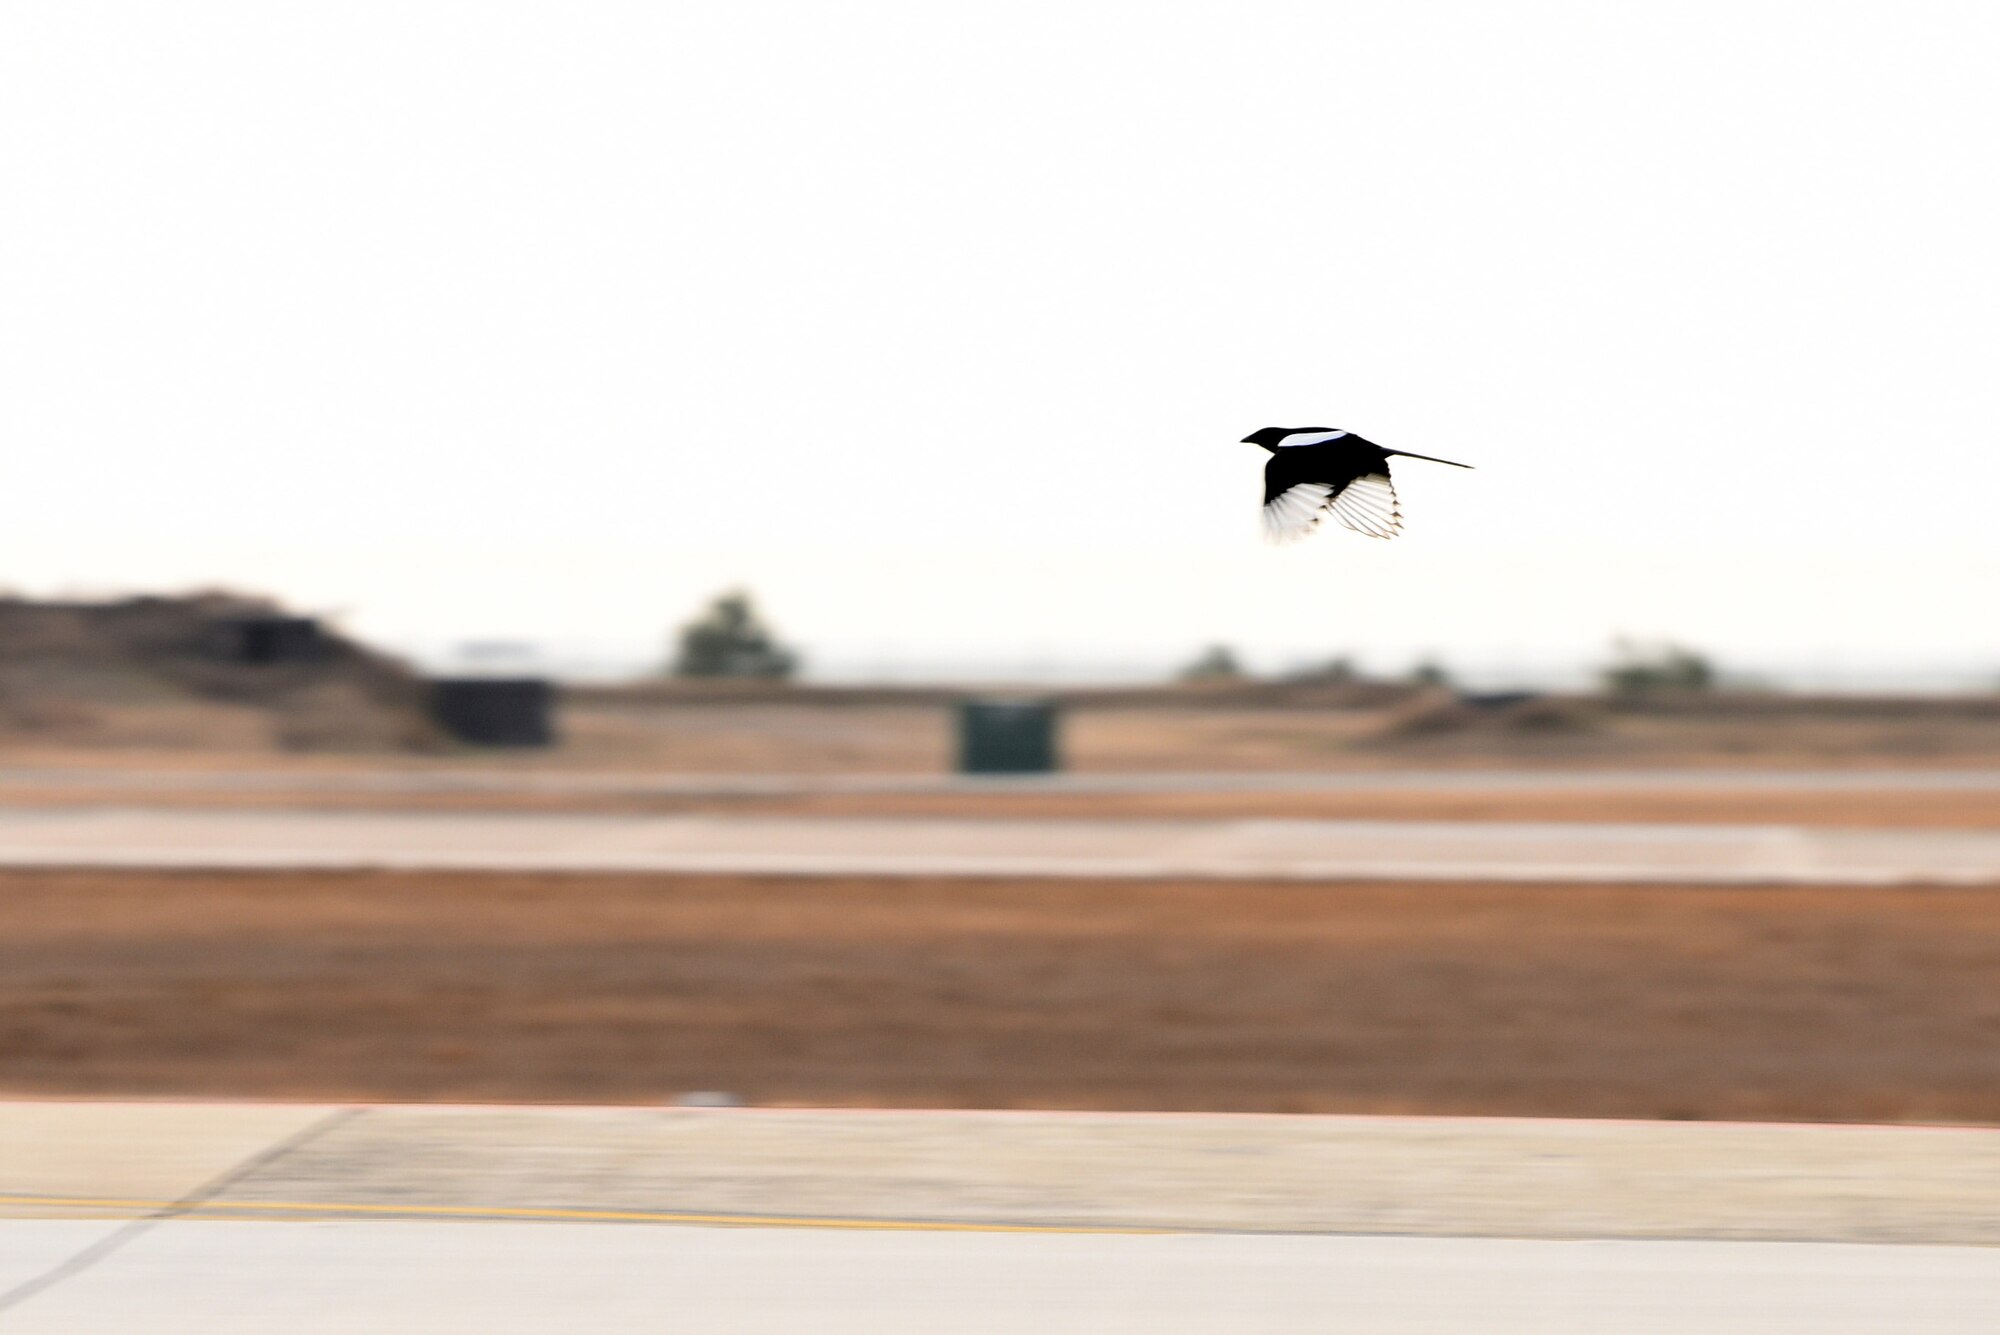 A magpie flies near the flight line at Kunsan Air Base, Republic of Korea, Dec. 17, 2018. Magpies, geese and doves are among the most common types of birds that the Bird and Wildlife Aircraft Strike Hazard group clear from the runway to allow for safe takeoffs. (U.S. Air Force photo by Staff Sgt. Joshua Edwards)